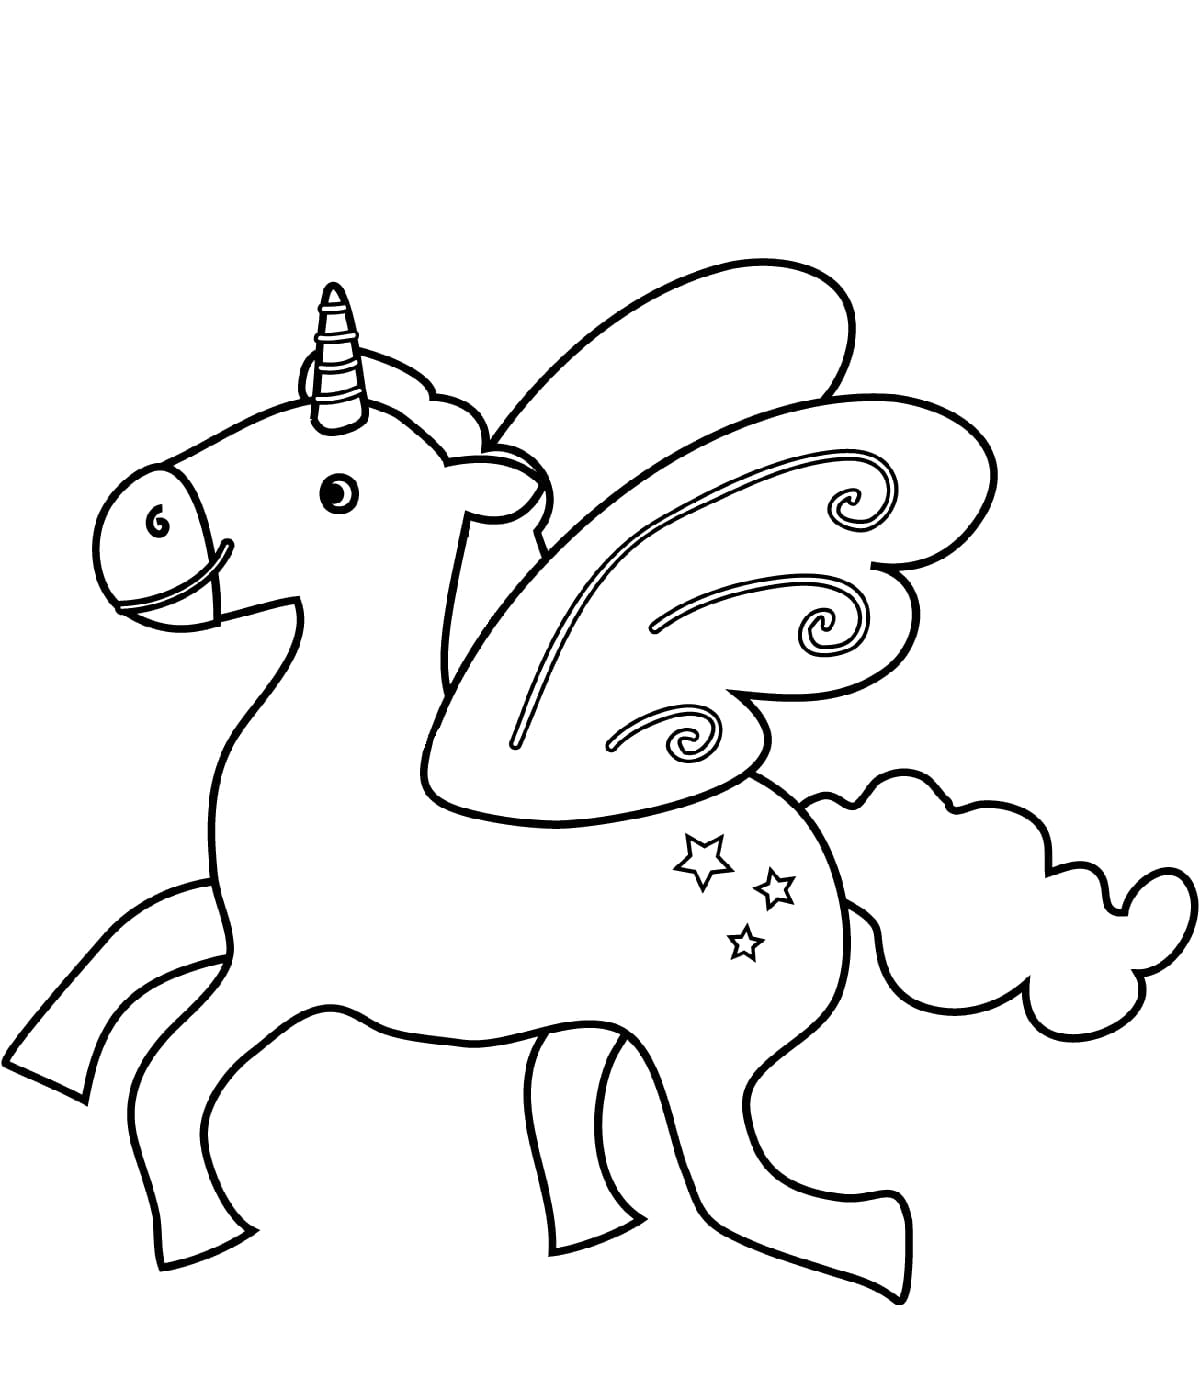 get unicorn among us coloring pages printable gif coloring pages